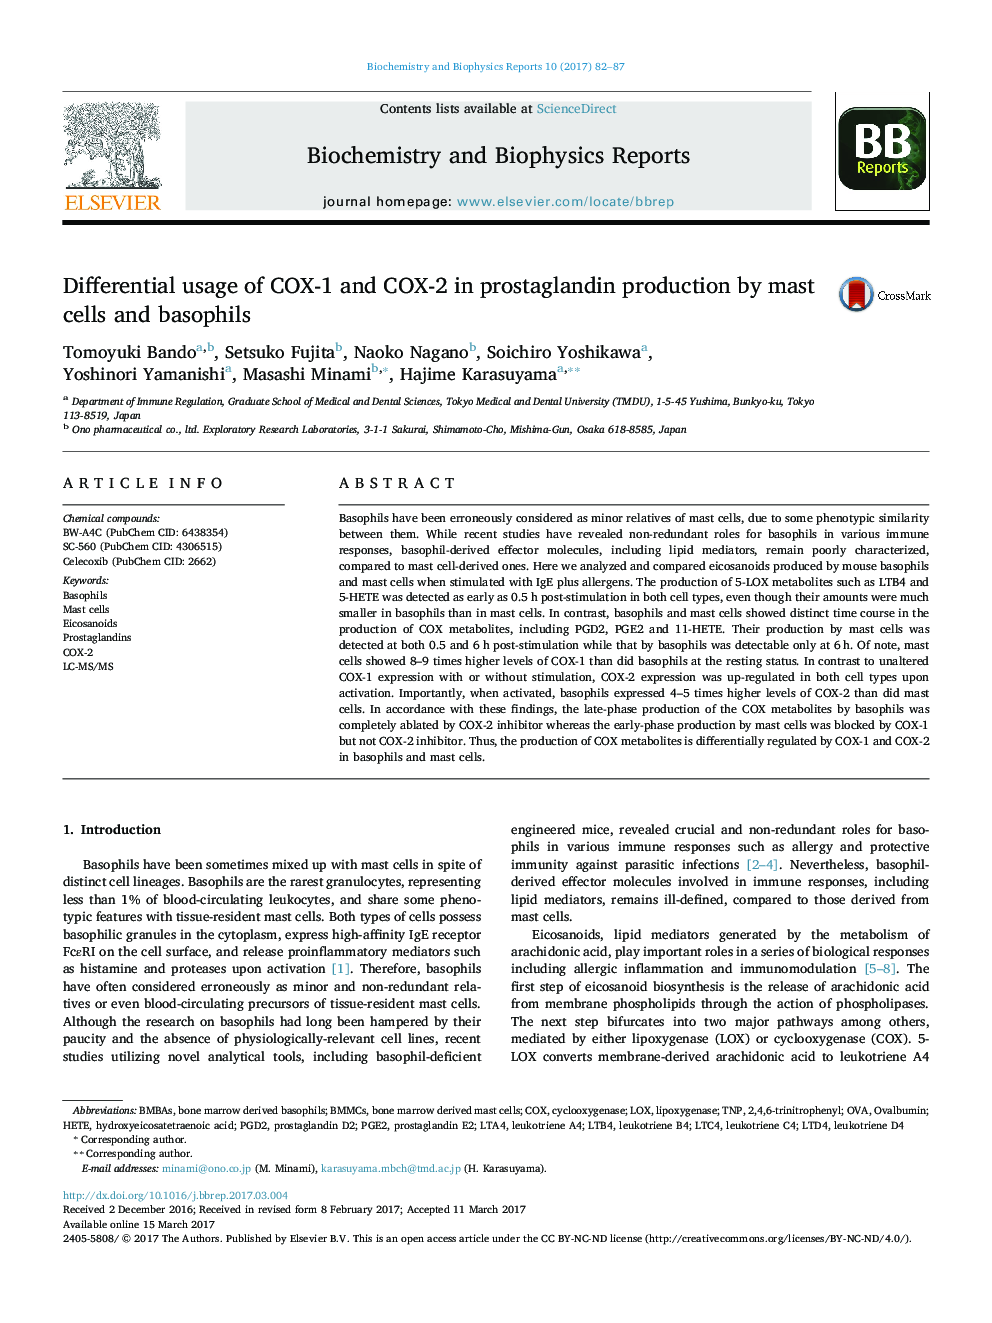 Differential usage of COX-1 and COX-2 in prostaglandin production by mast cells and basophils